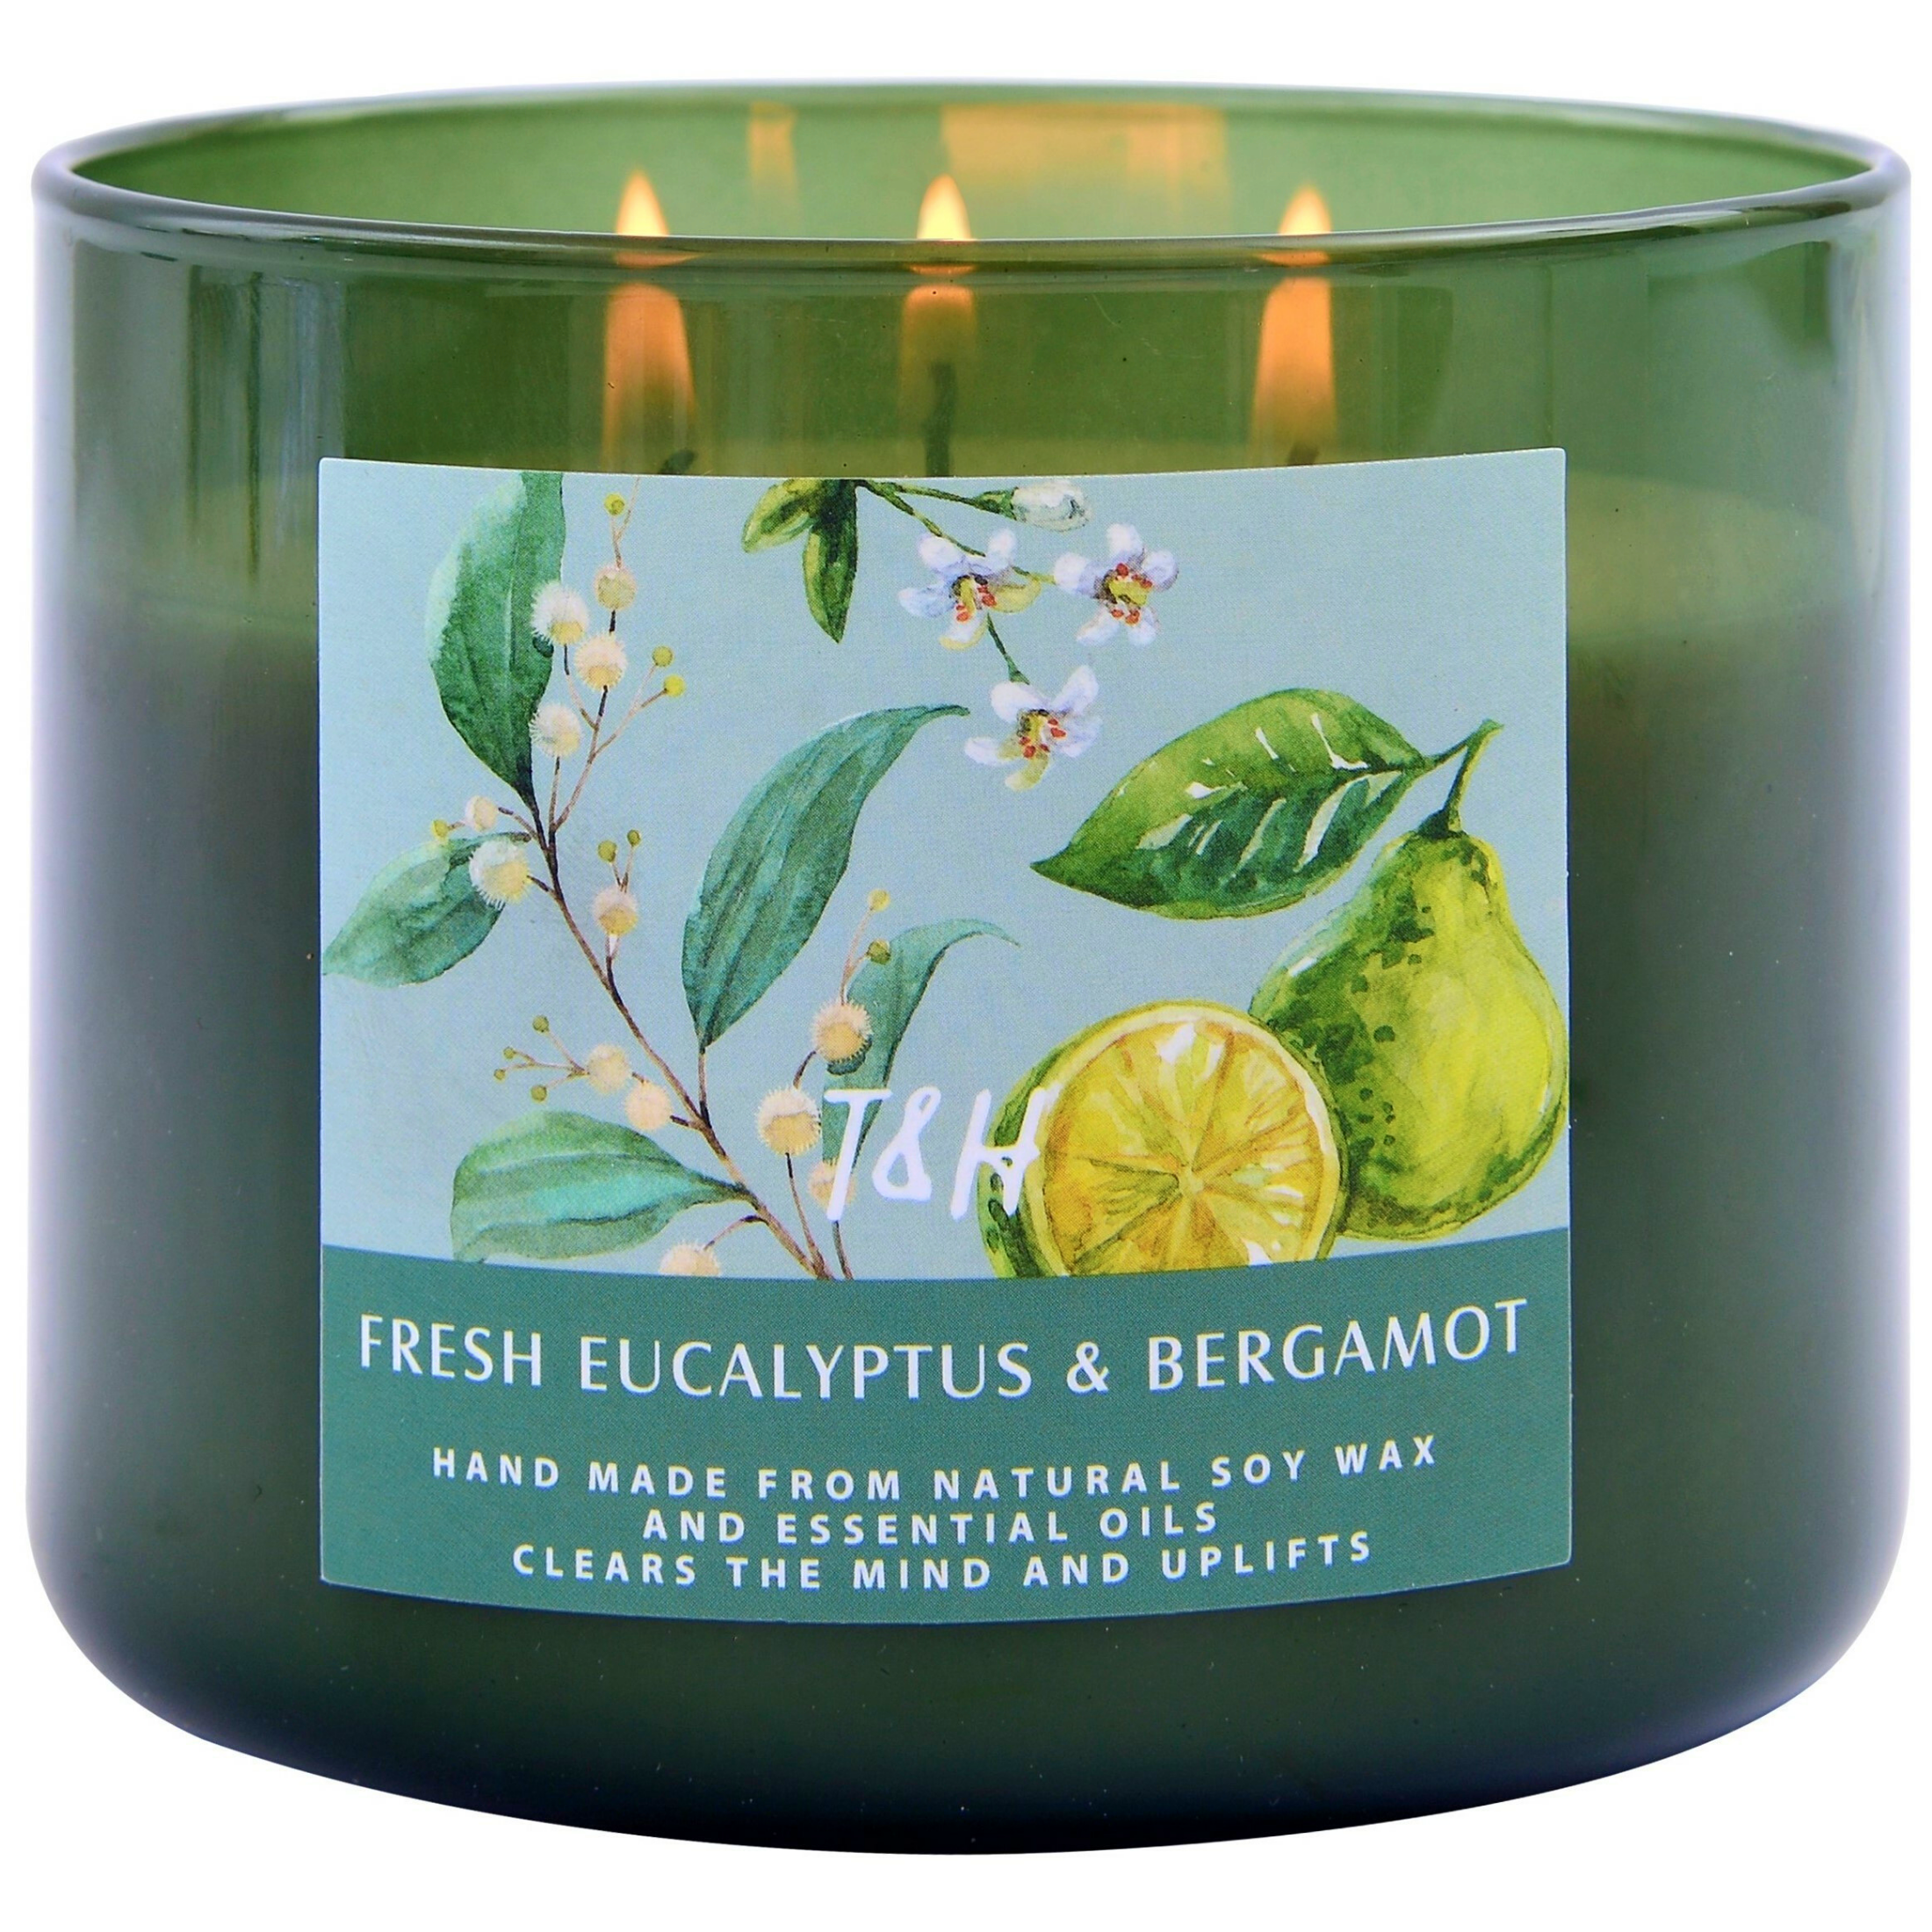 T&H Fresh Eucalyptus Bergamot 3-Wick Candle | Natural Soy Wax Candle for Home, 15.8 Oz Large Aromatherapy Candle for Men and Women